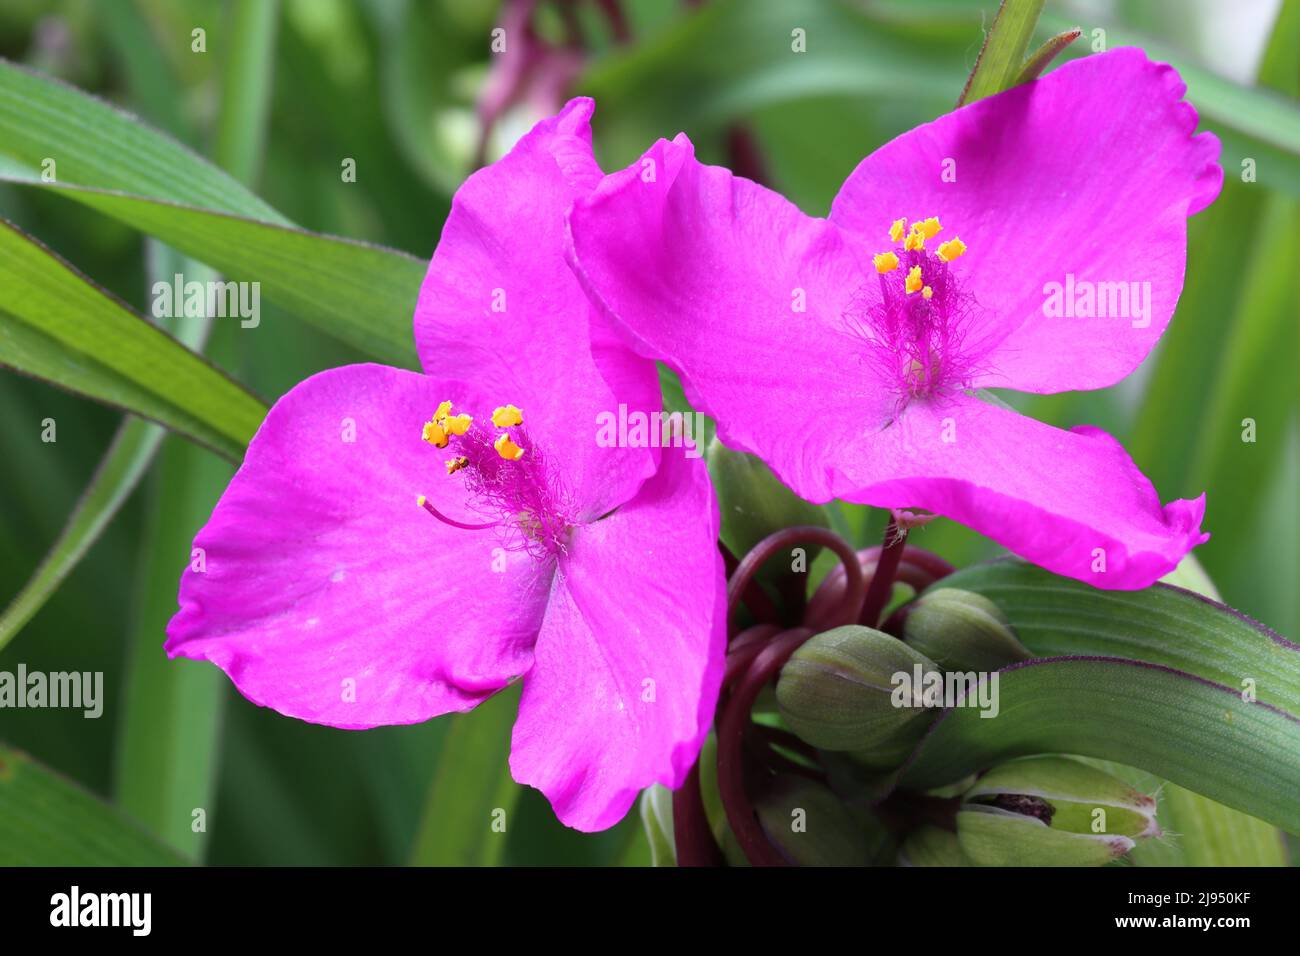 close-up of two pink tradescantia flowers Stock Photo